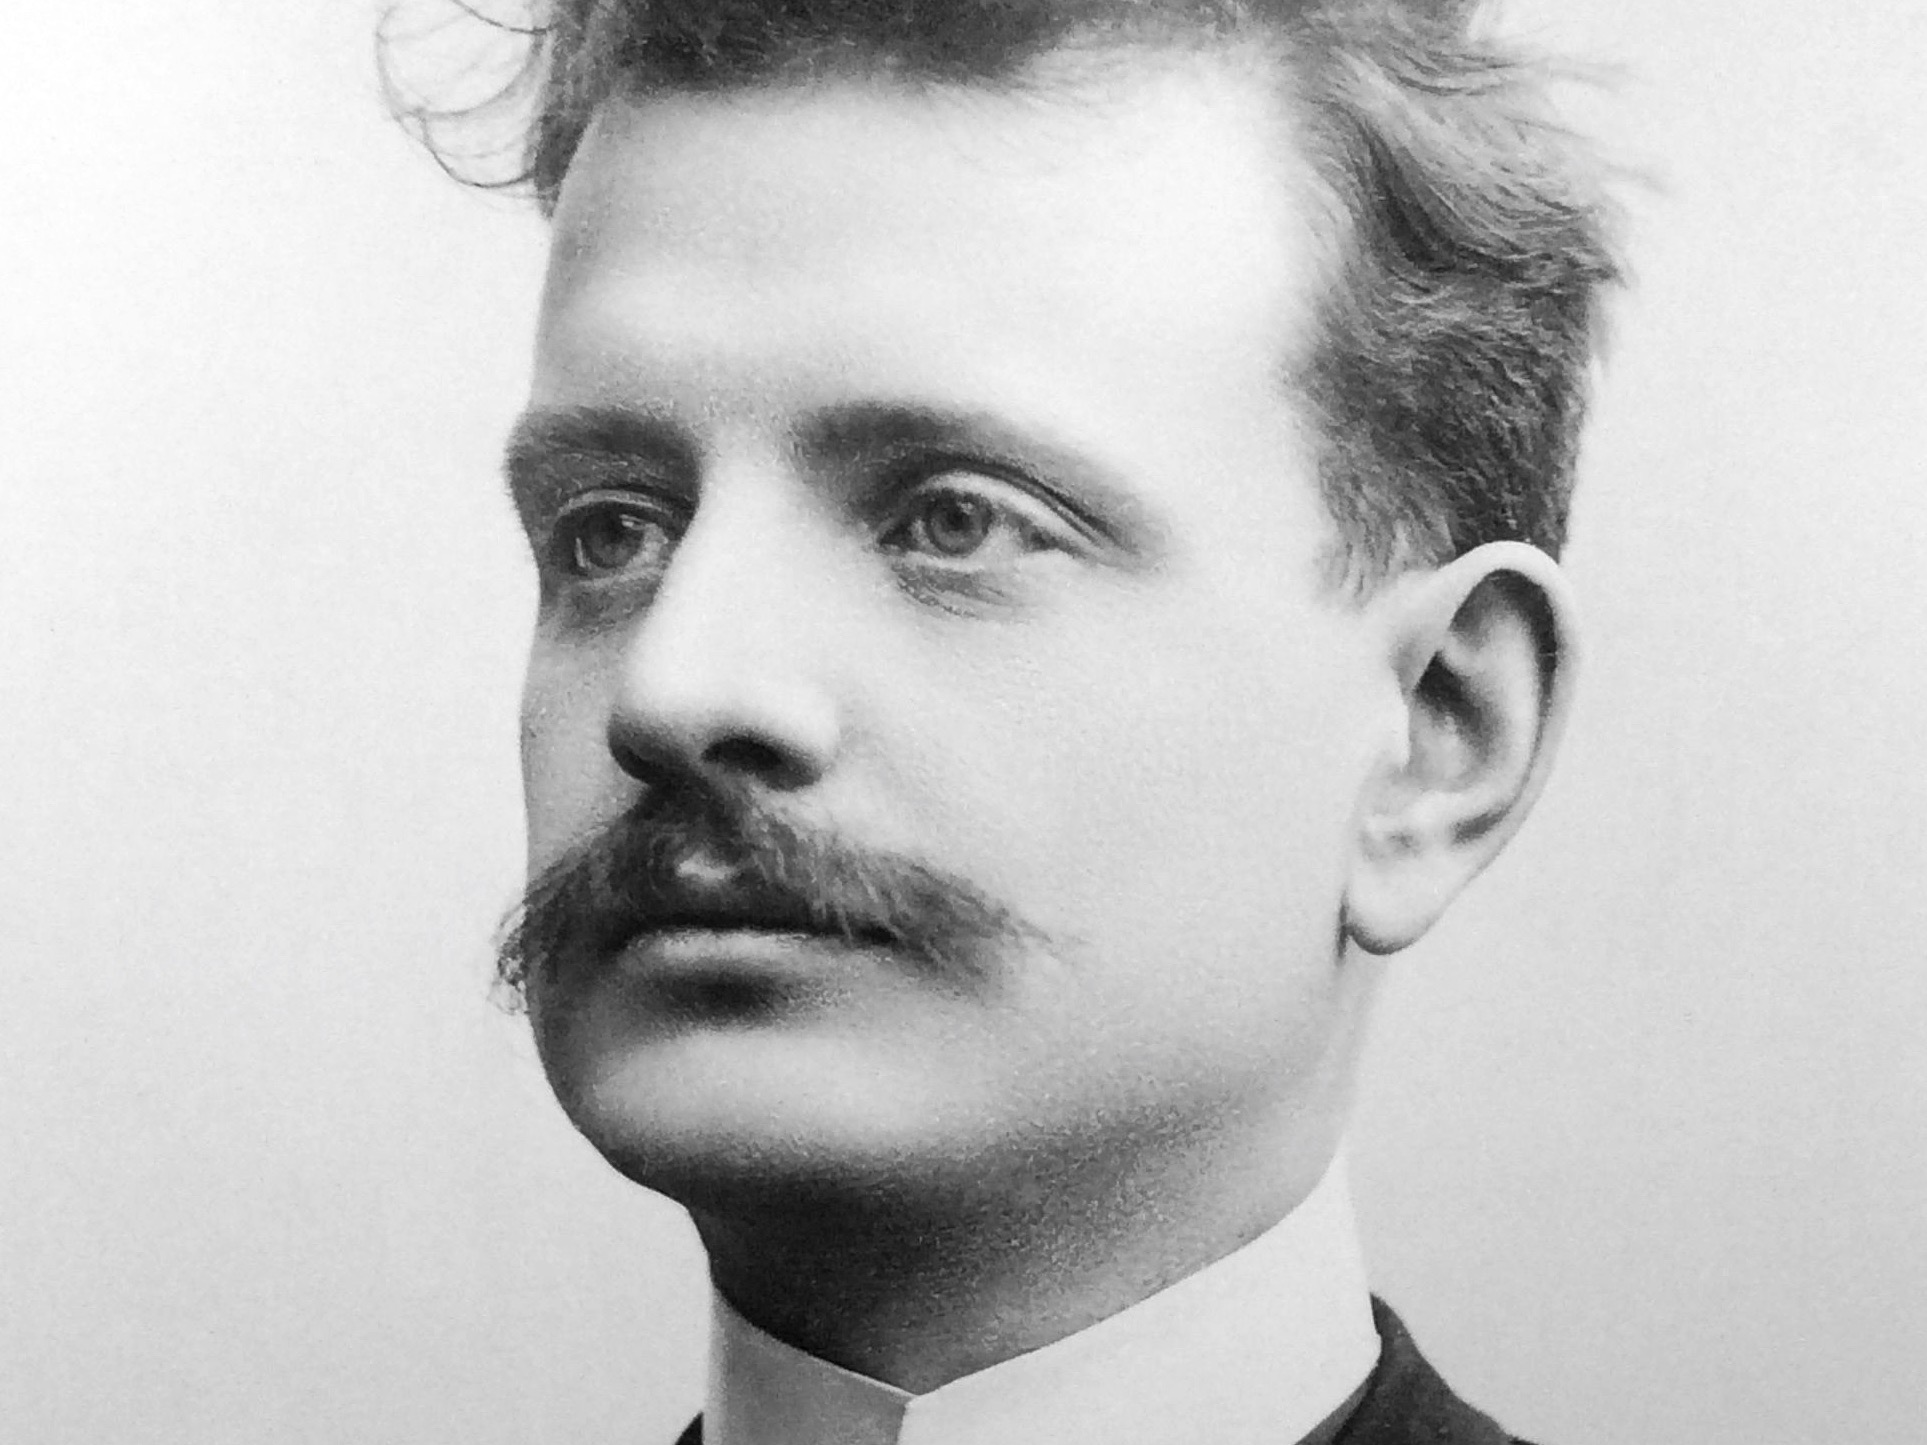 Portrait of a young Jean Sibelius.